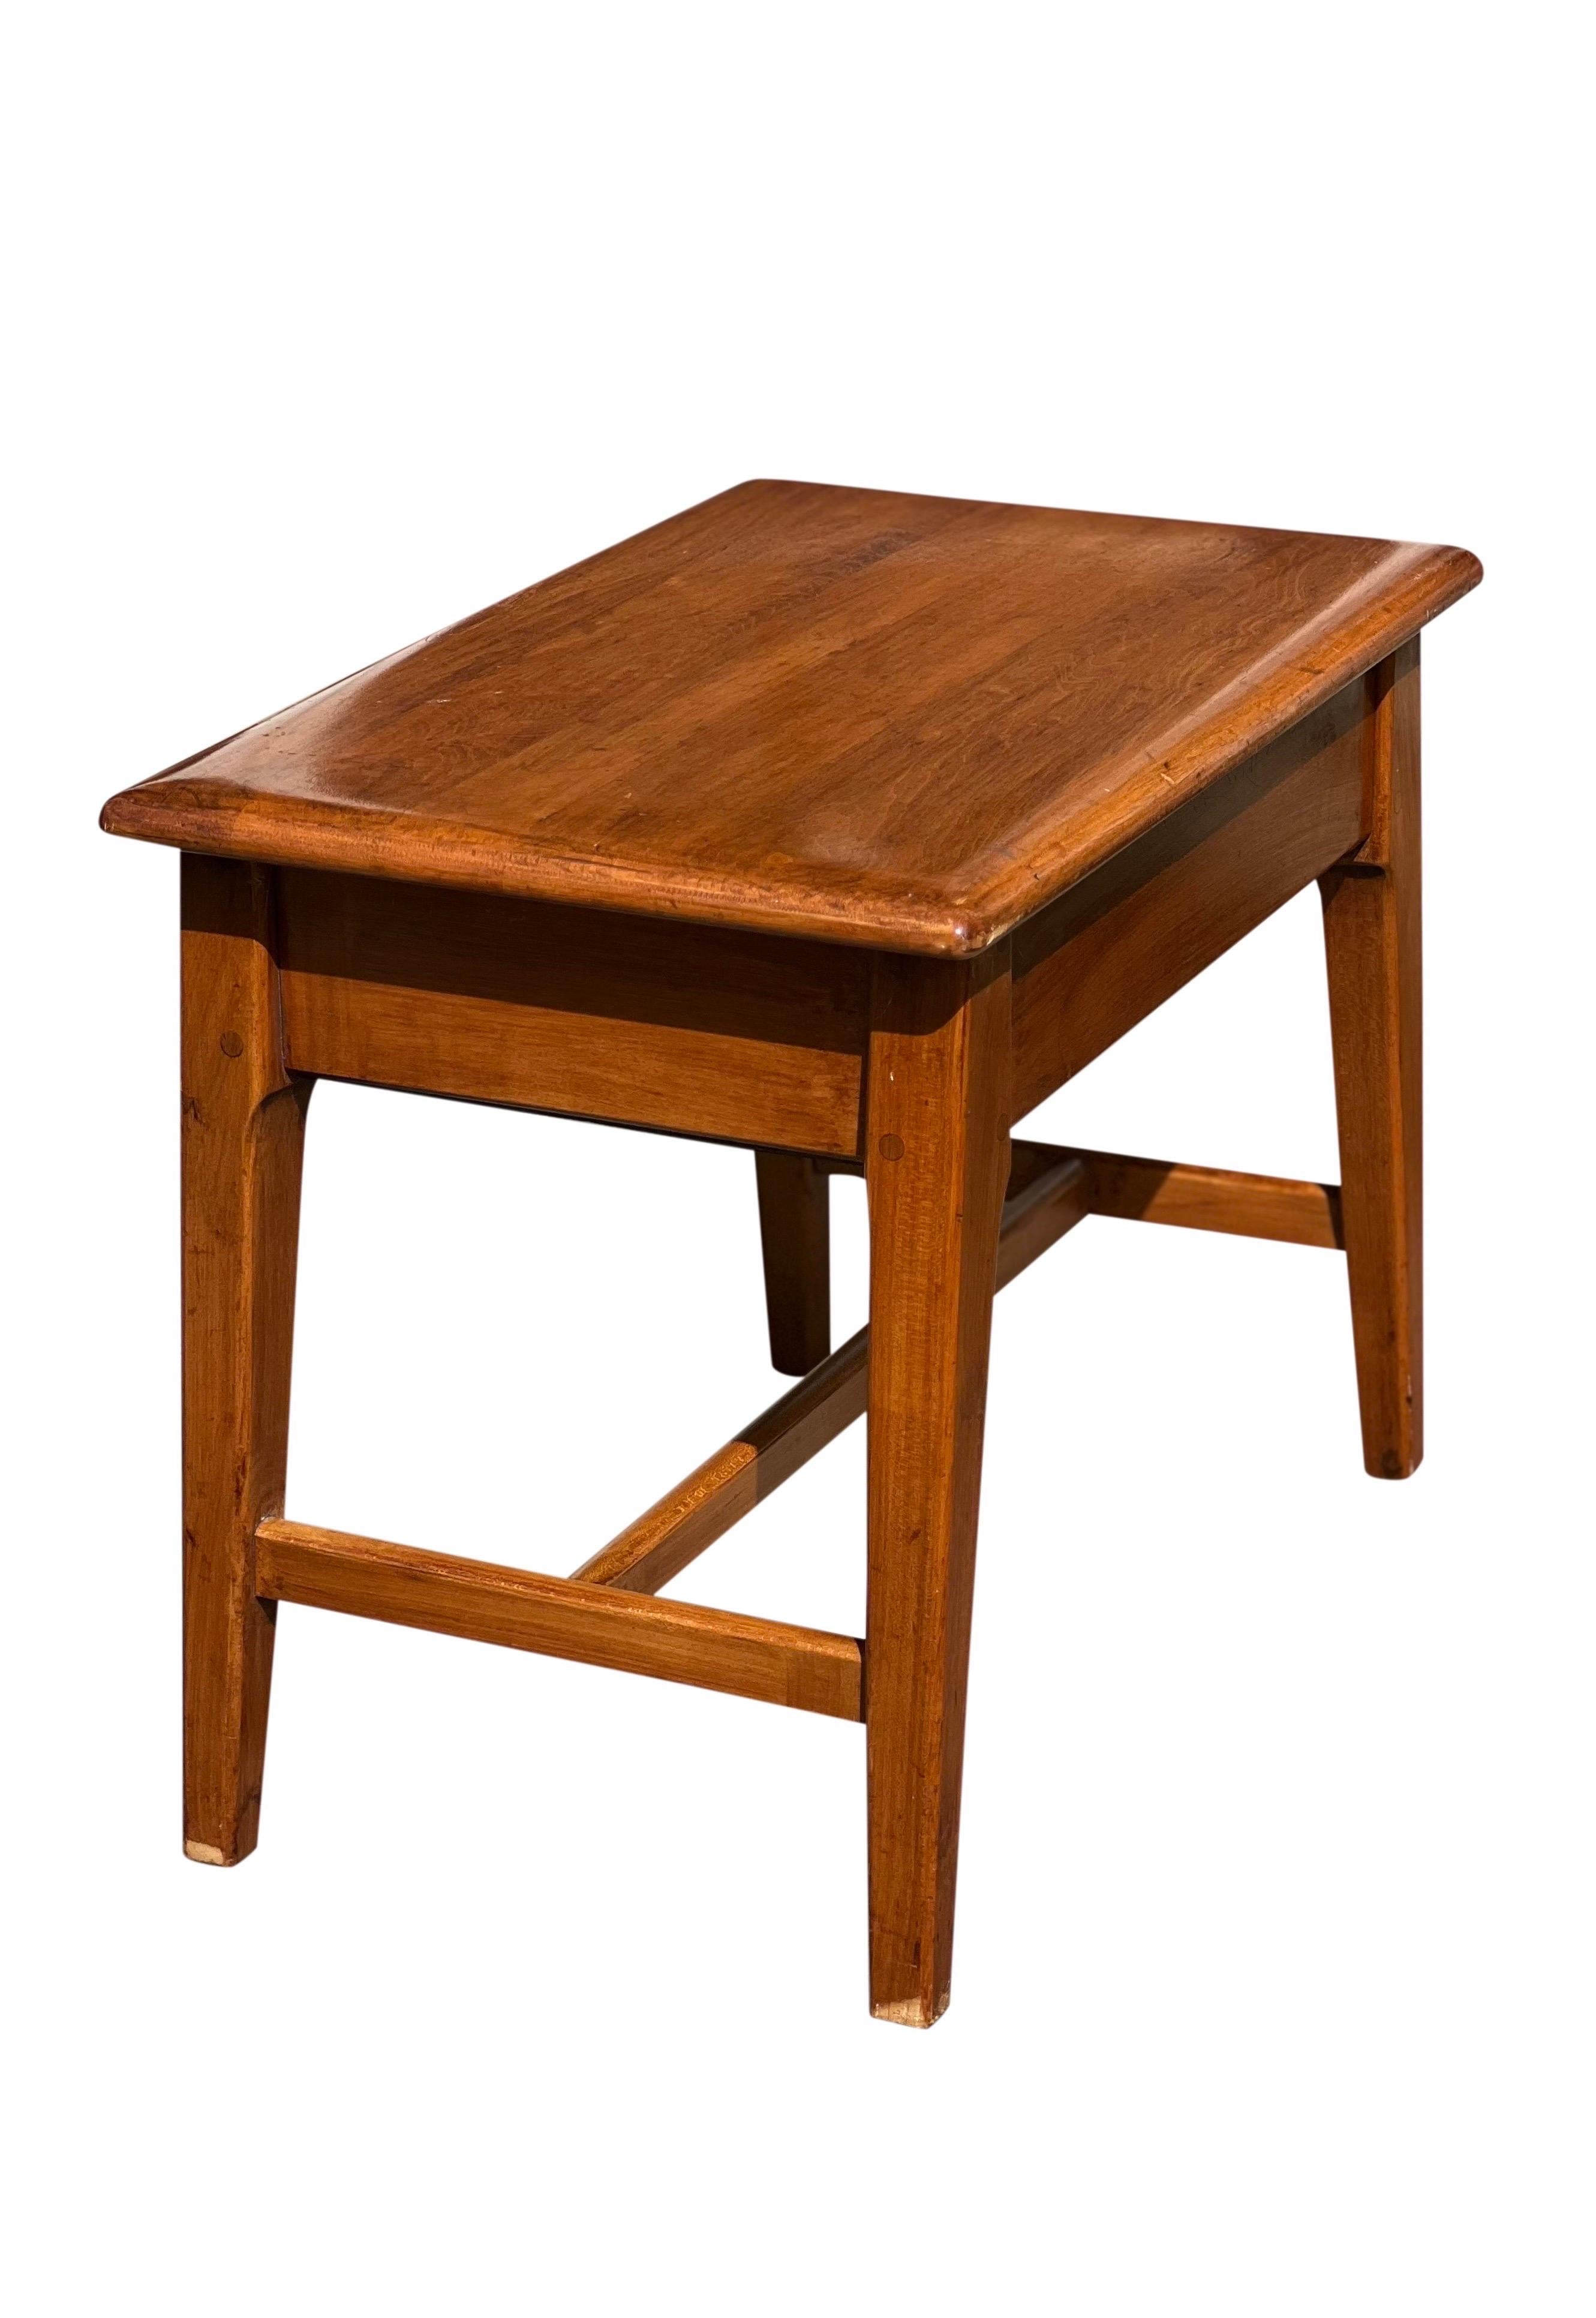 20th Century Midcentury Italian Oak Sewing Table or Stool with Single Drawer For Sale